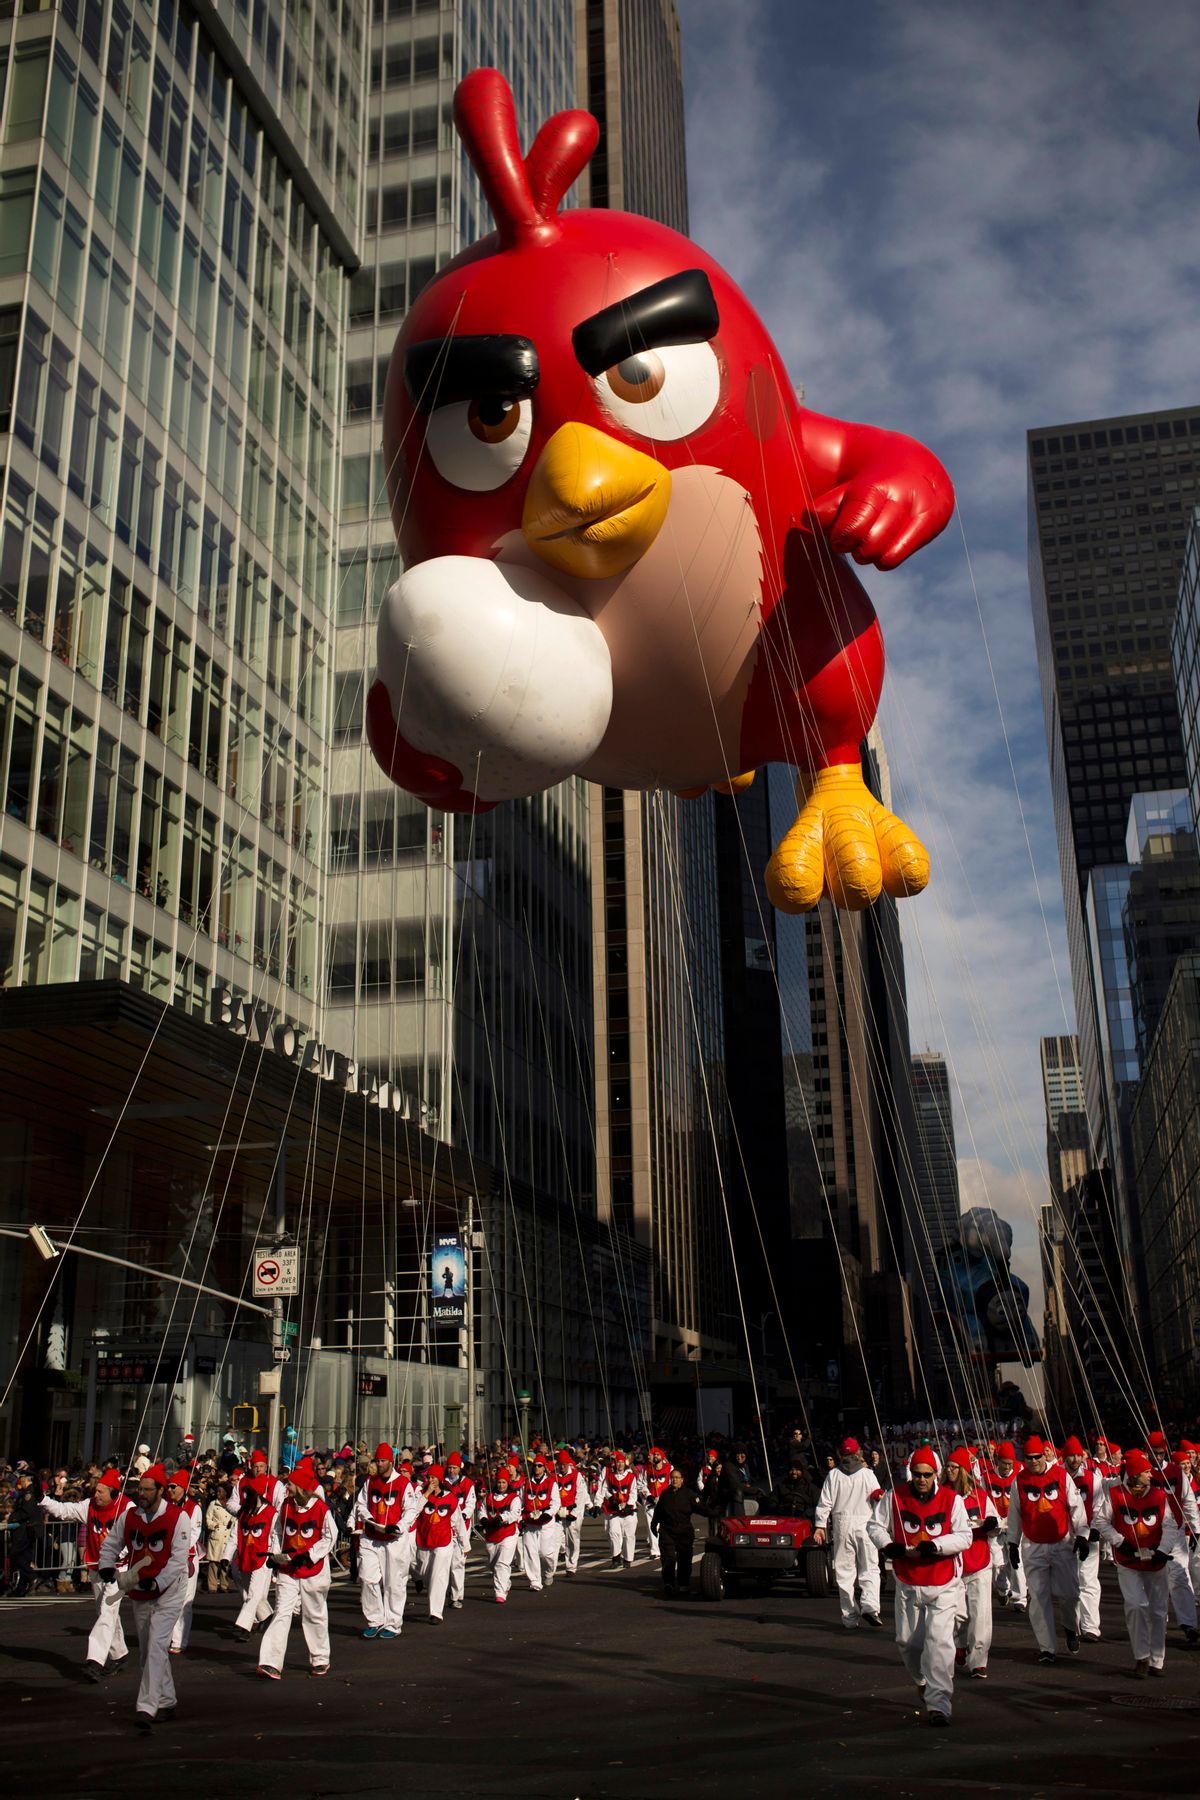 FILE - In this Thursday, Nov. 26, 2015, file photo, the balloon Angry Bird is moved through Sixth Avenue during the Macy's Thanksgiving Day Parade in New York. A giant Charlie Brown balloon will join 1,000 clowns and a dozen marching bands along a parade route lined with spectators and police in plainclothes for the 90th annual parade. (AP Photo/Andres Kudacki, File) (AP)